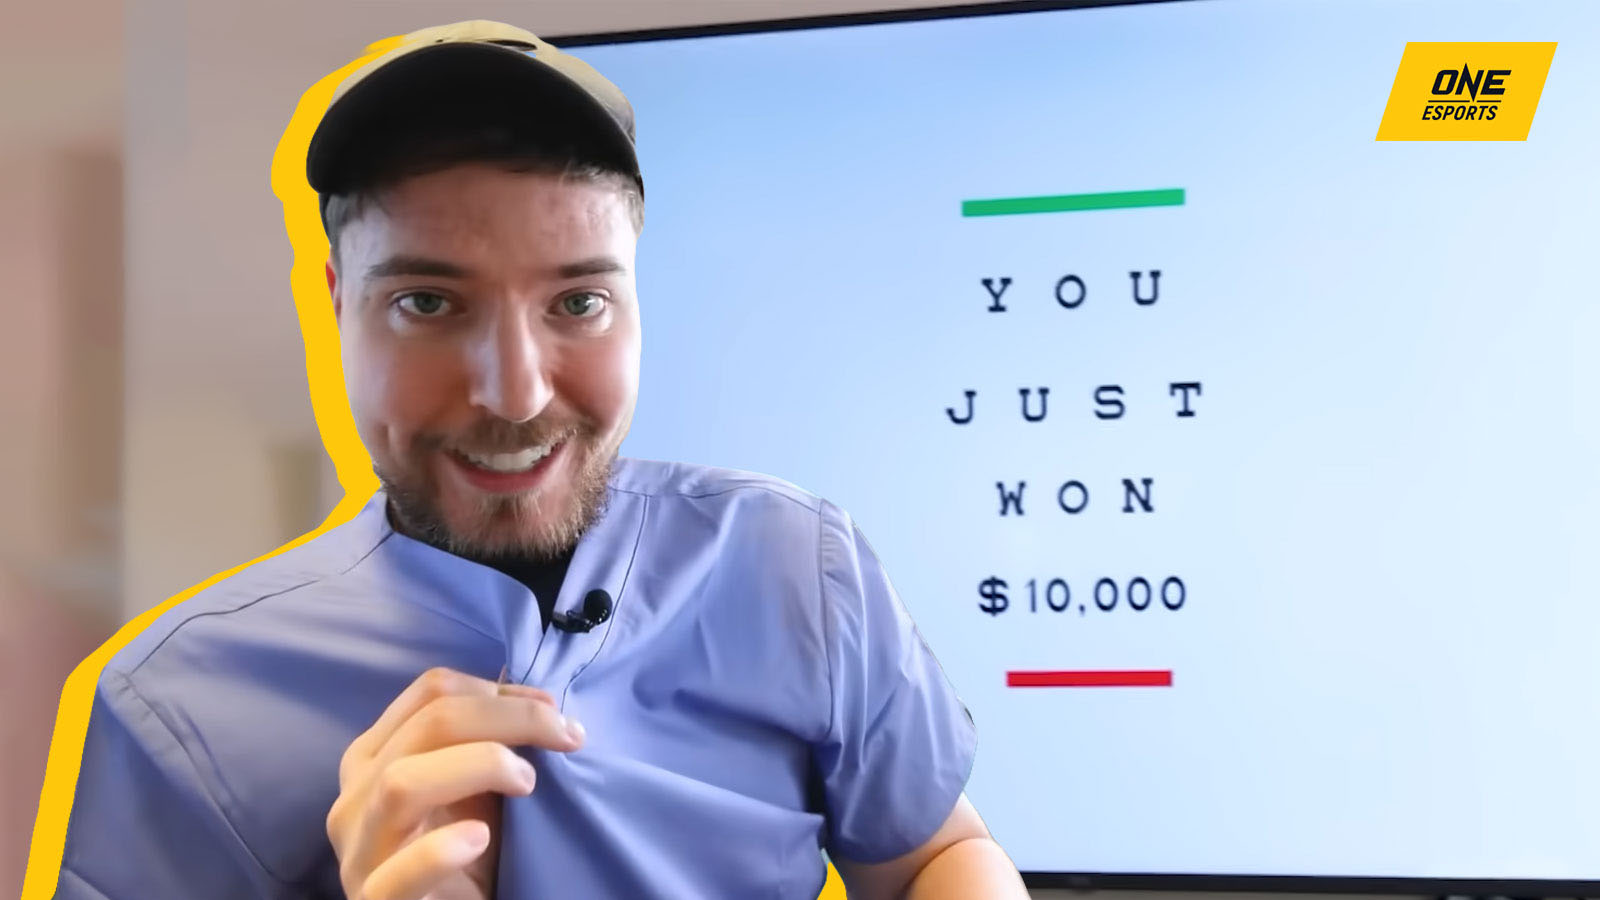 Mr. Beast Helped 1K Blind People Get Their Sight Restoration Surgeries But  The Internet Didn't Take It Quite Well